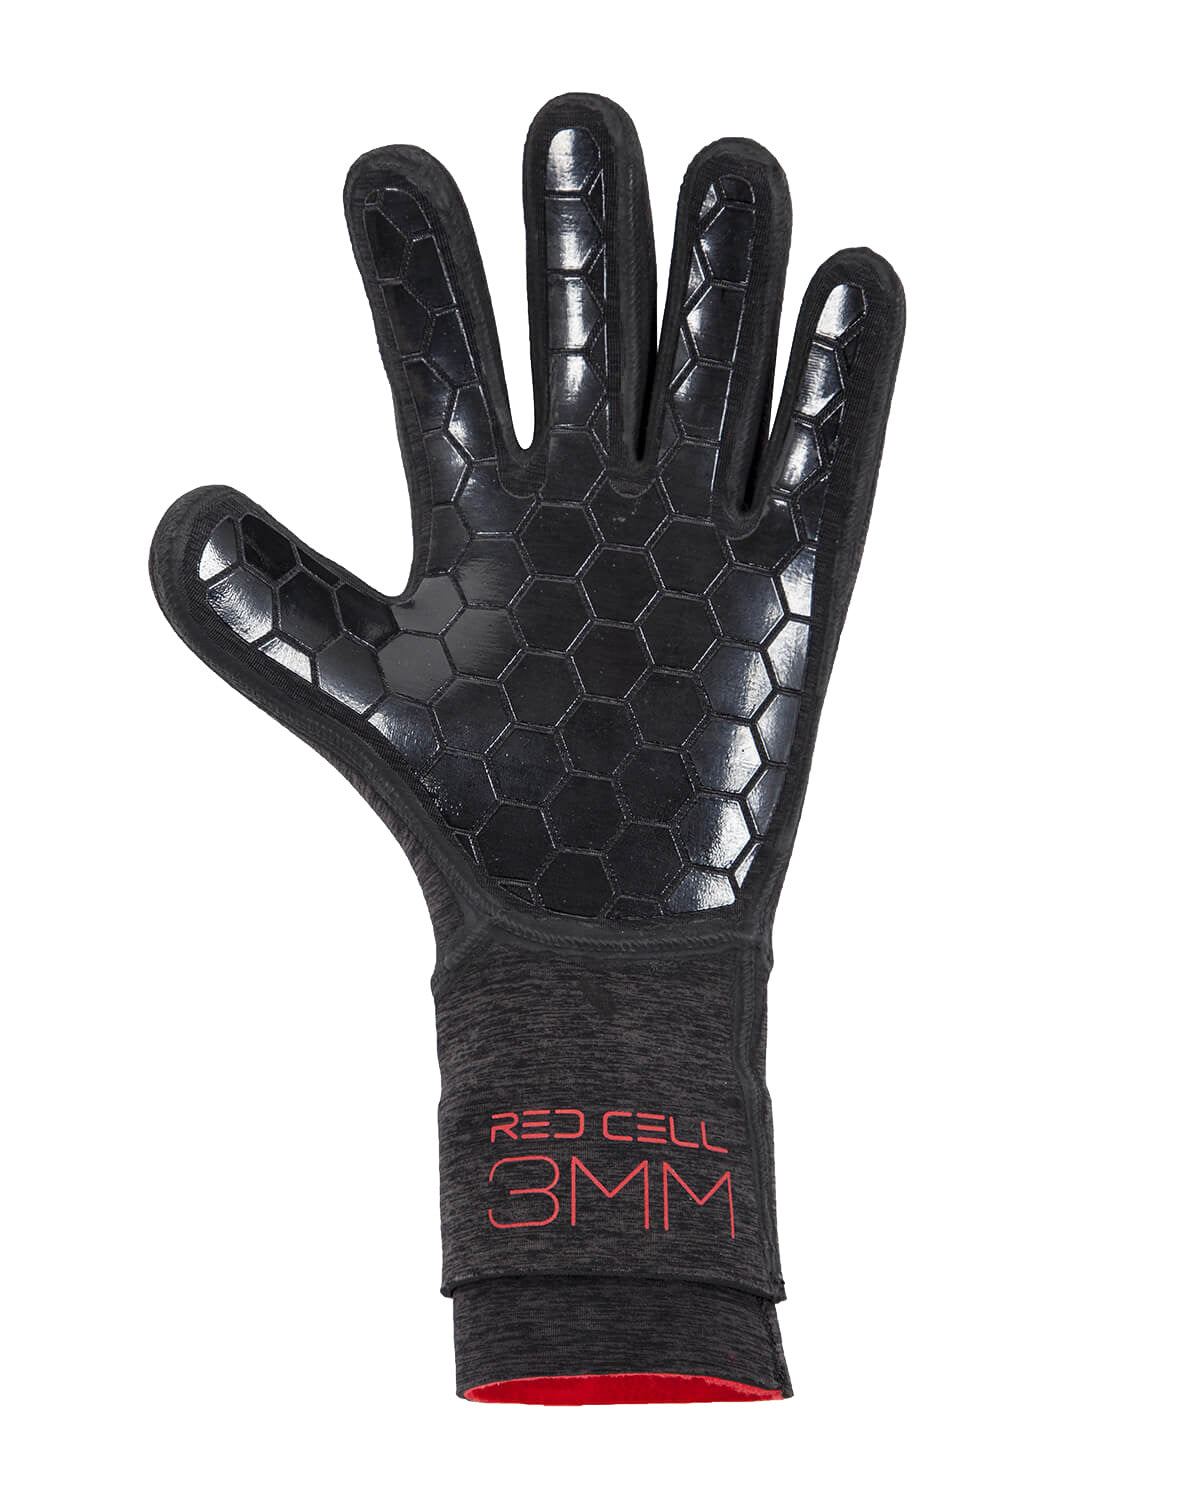 3mm Body Glove RED CELL Wetsuit Gloves